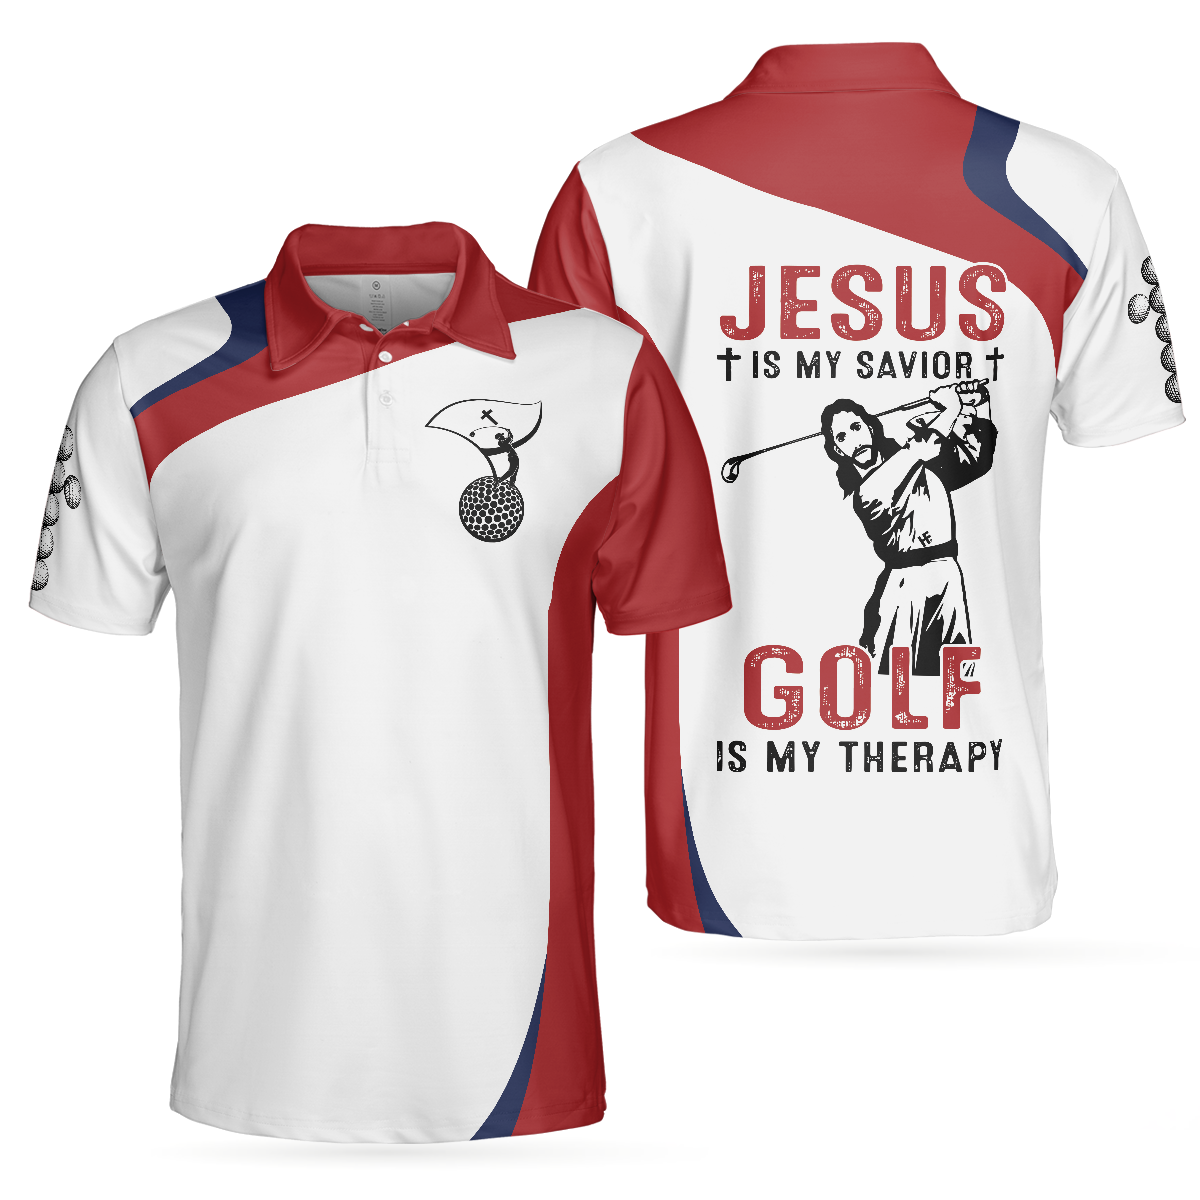 Golf Is My Therapy Polo Shirt, Best Golf Shirts For A Good Christian, Polo Golfing Shirt With Sayings